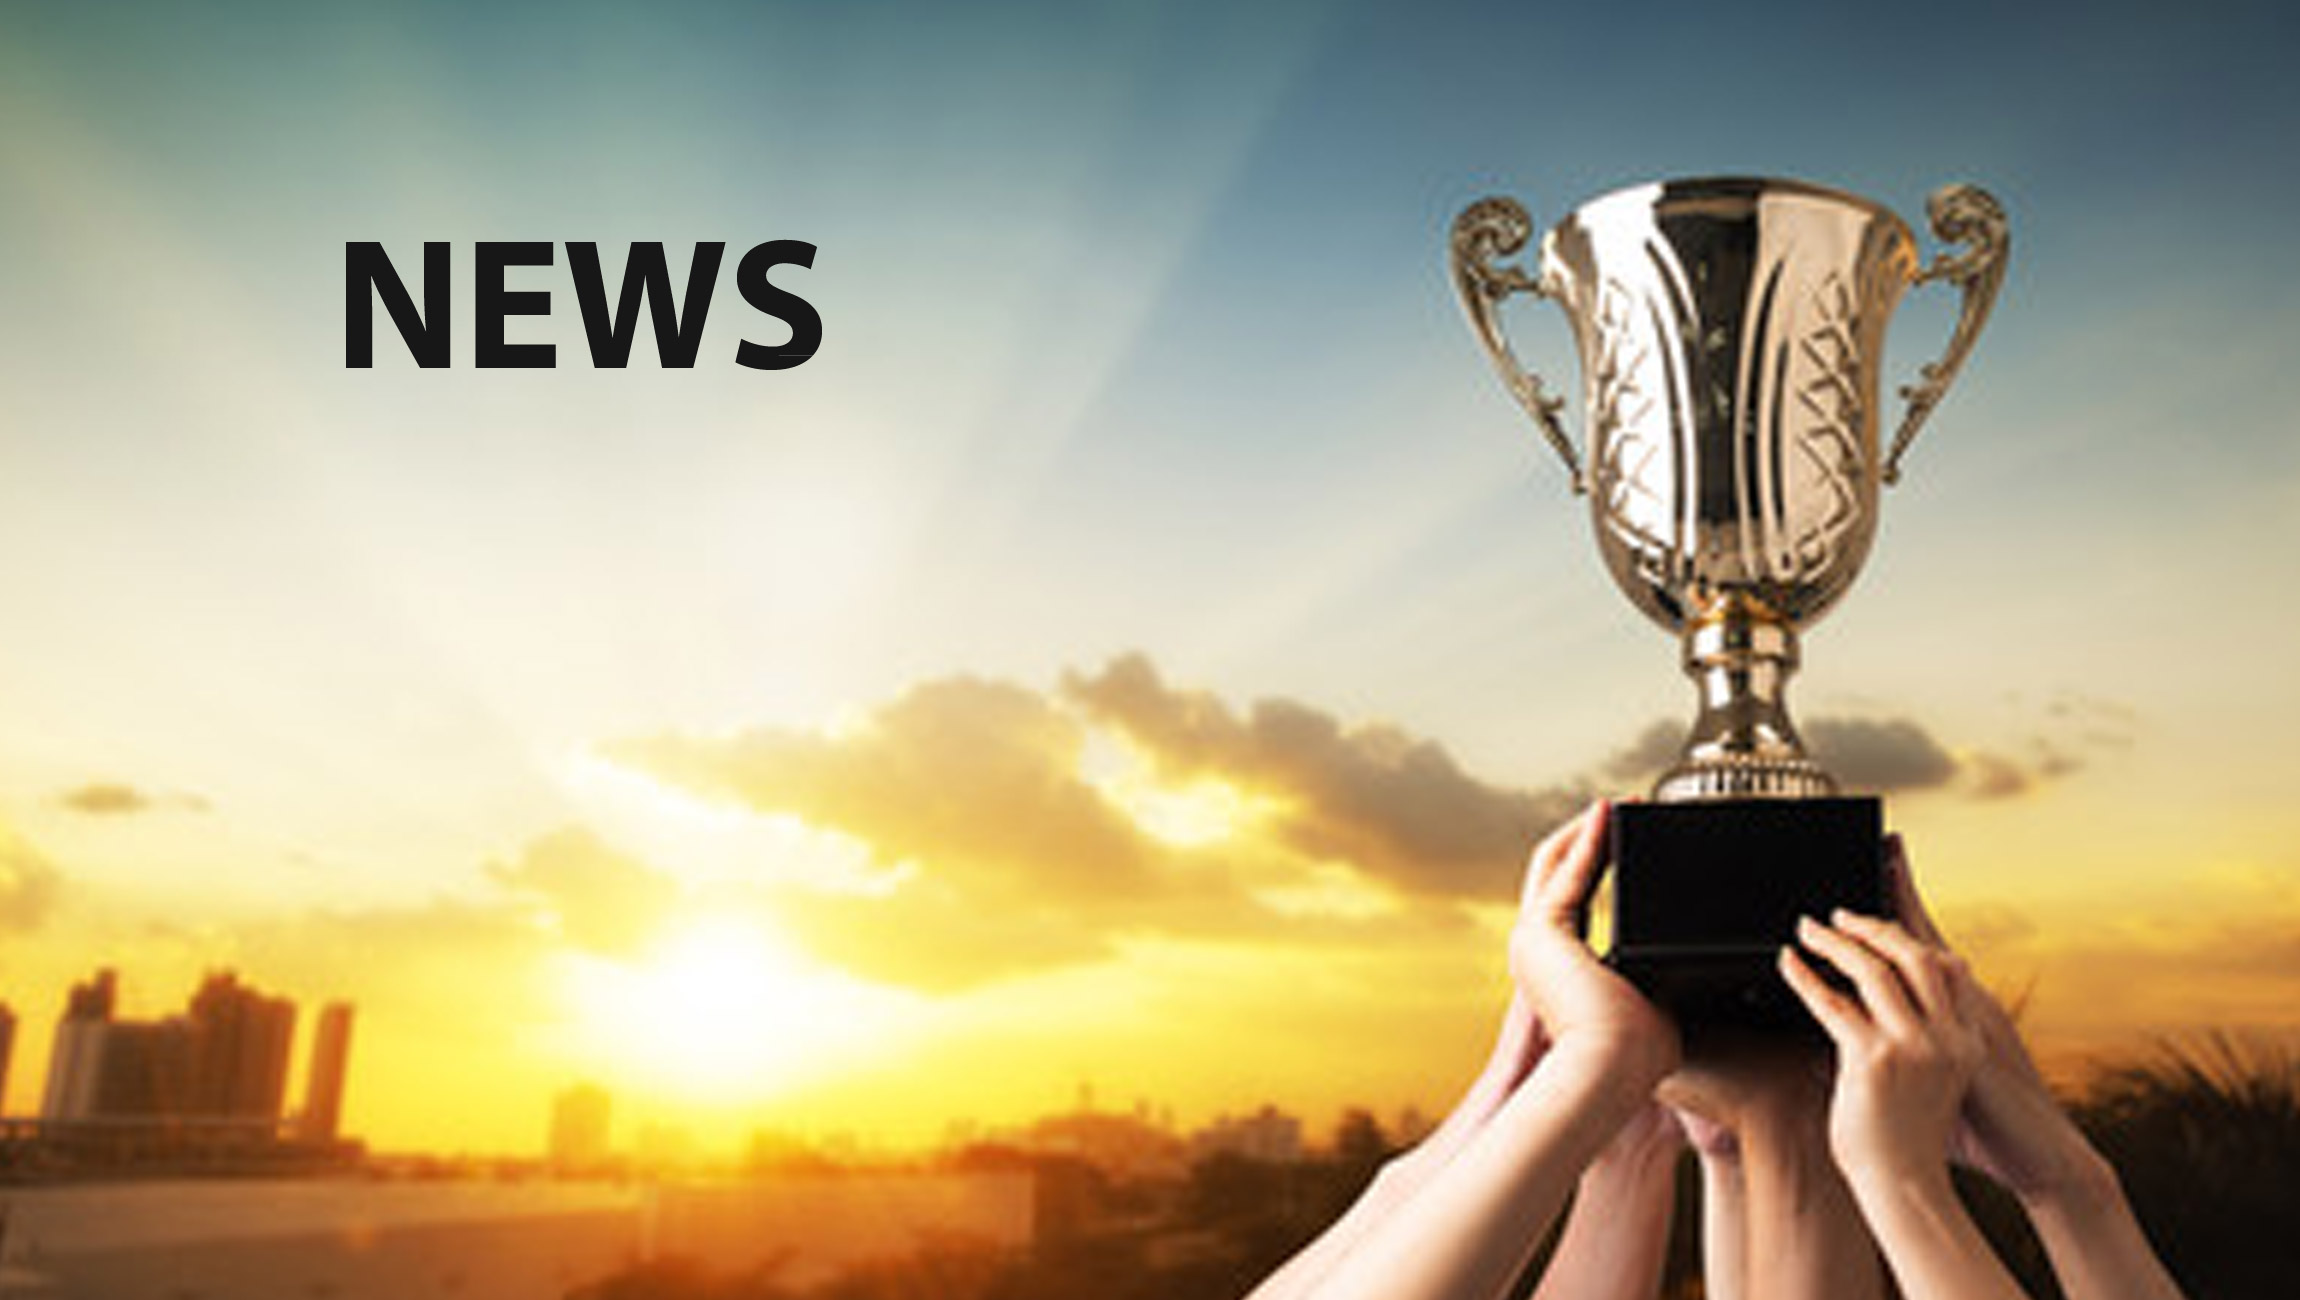 Demandbase Recognized with Four “Top Rated” Awards by TrustRadius 1